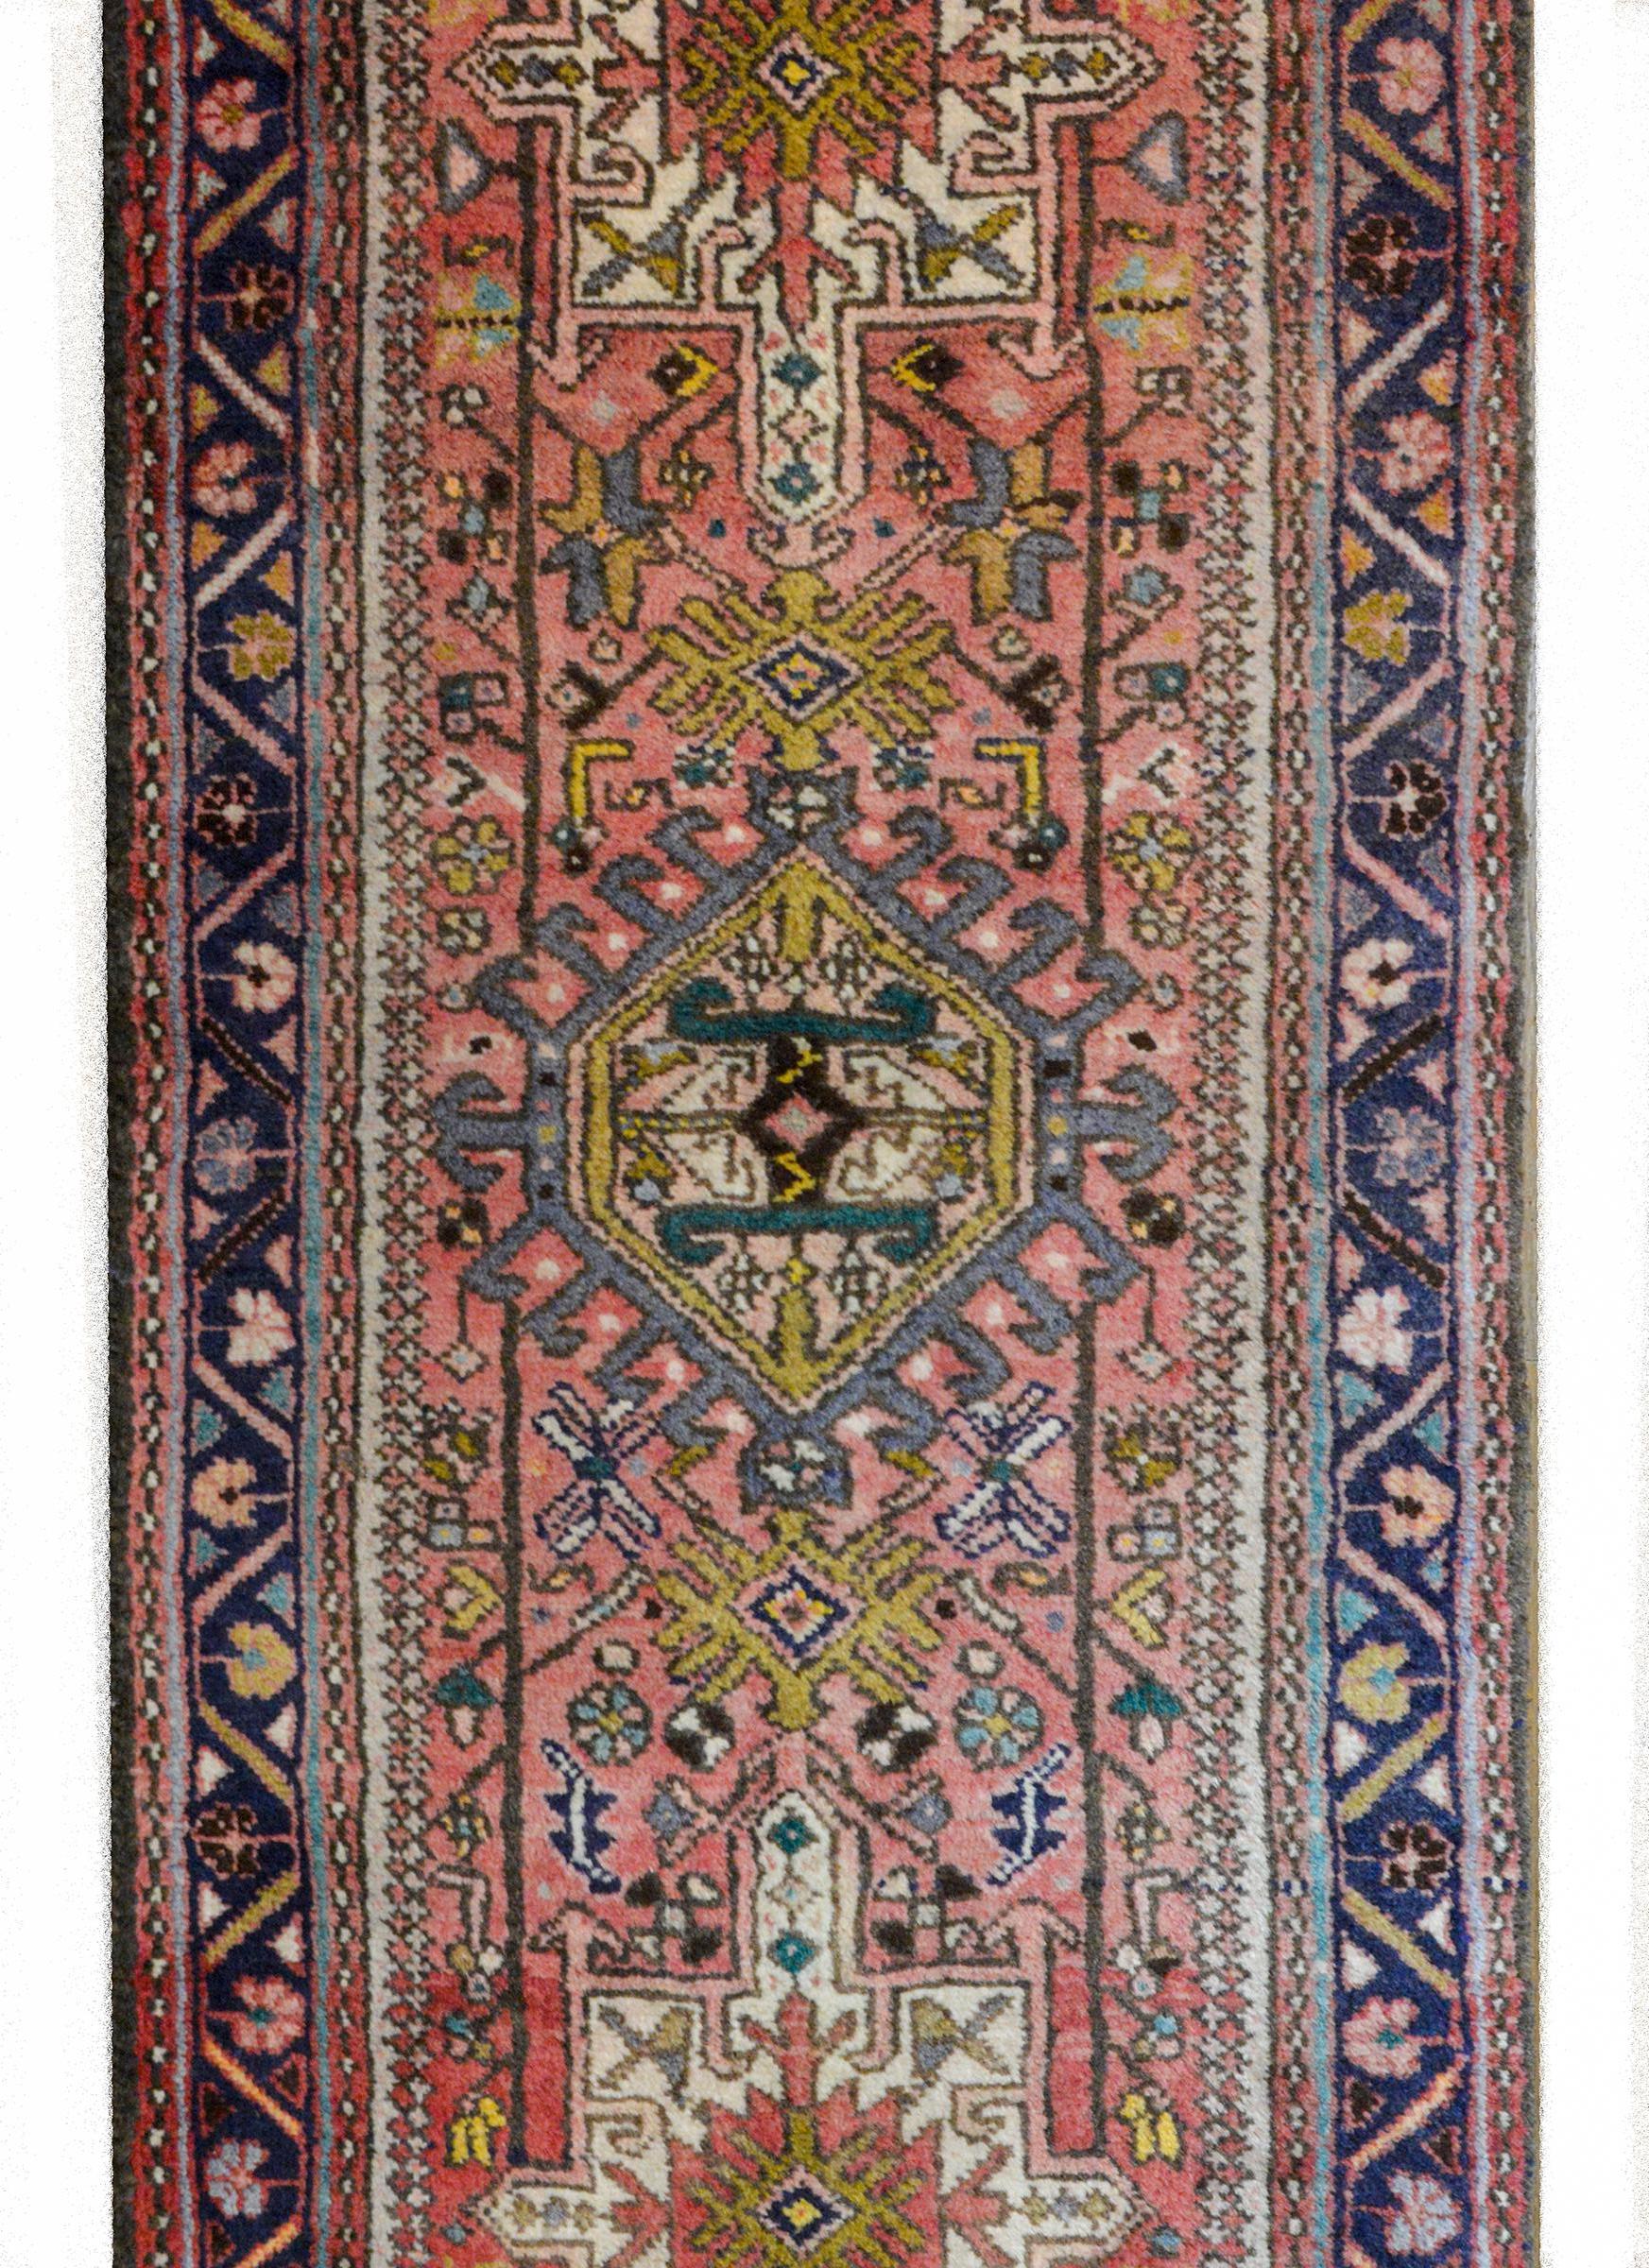 A wonderful mid-20th century Persian Karadja runner with multiple stylized floral medallions woven in indigo, pink, gold and green amidst a field of more stylized flowers and leaves against a pale cranberry background. The border is wonderful